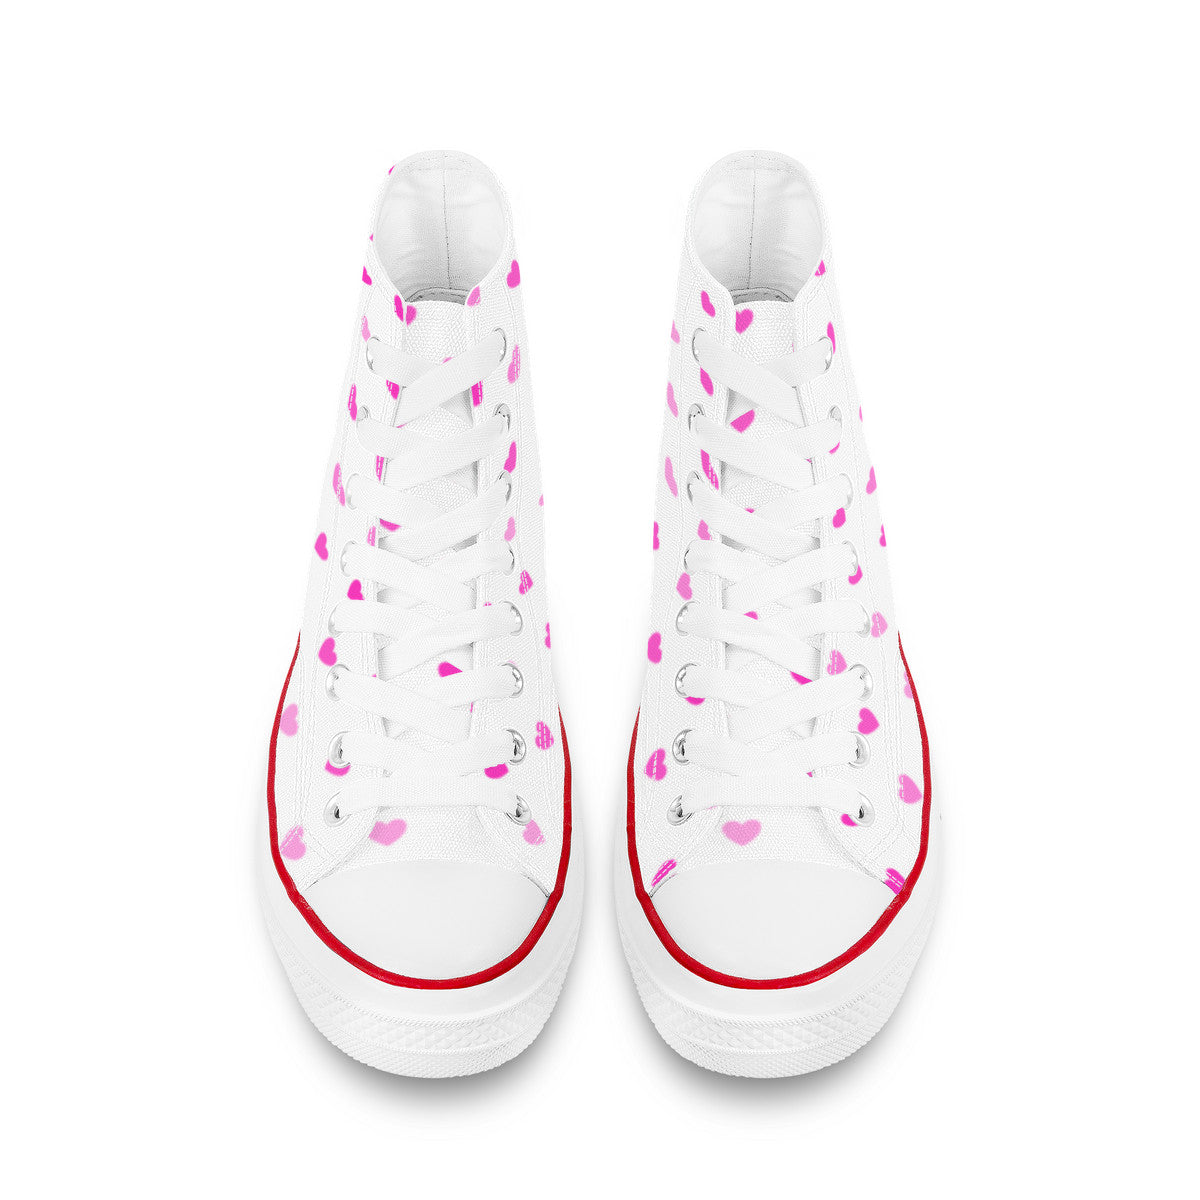 BT21 Cooky High Top Canvas Sneakers